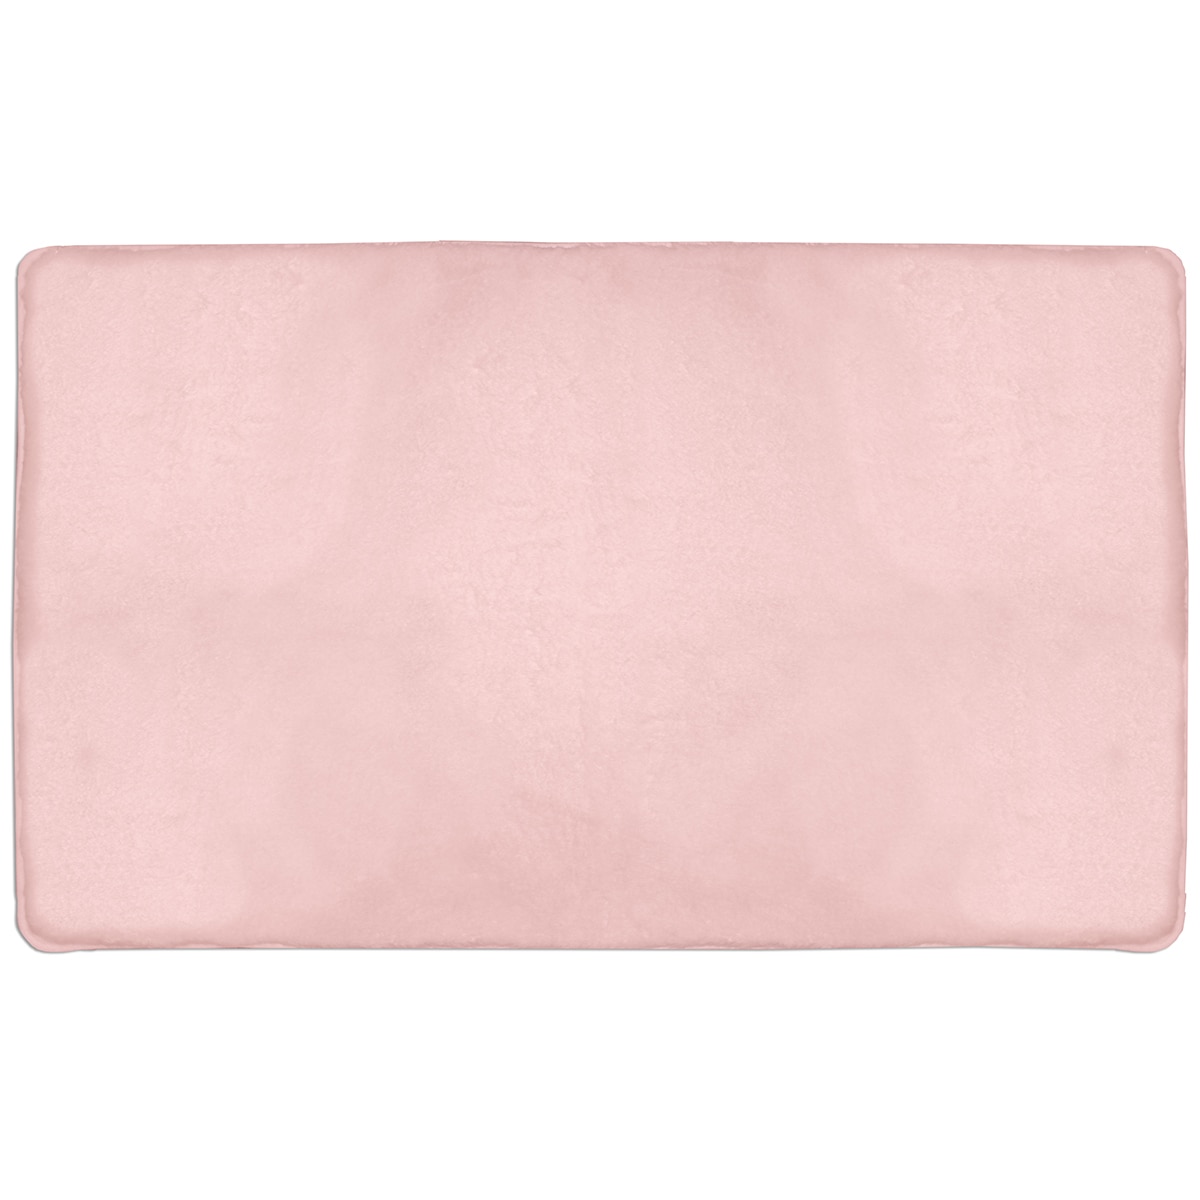 Town & Country Living Sumatra Accent Rug - Pink